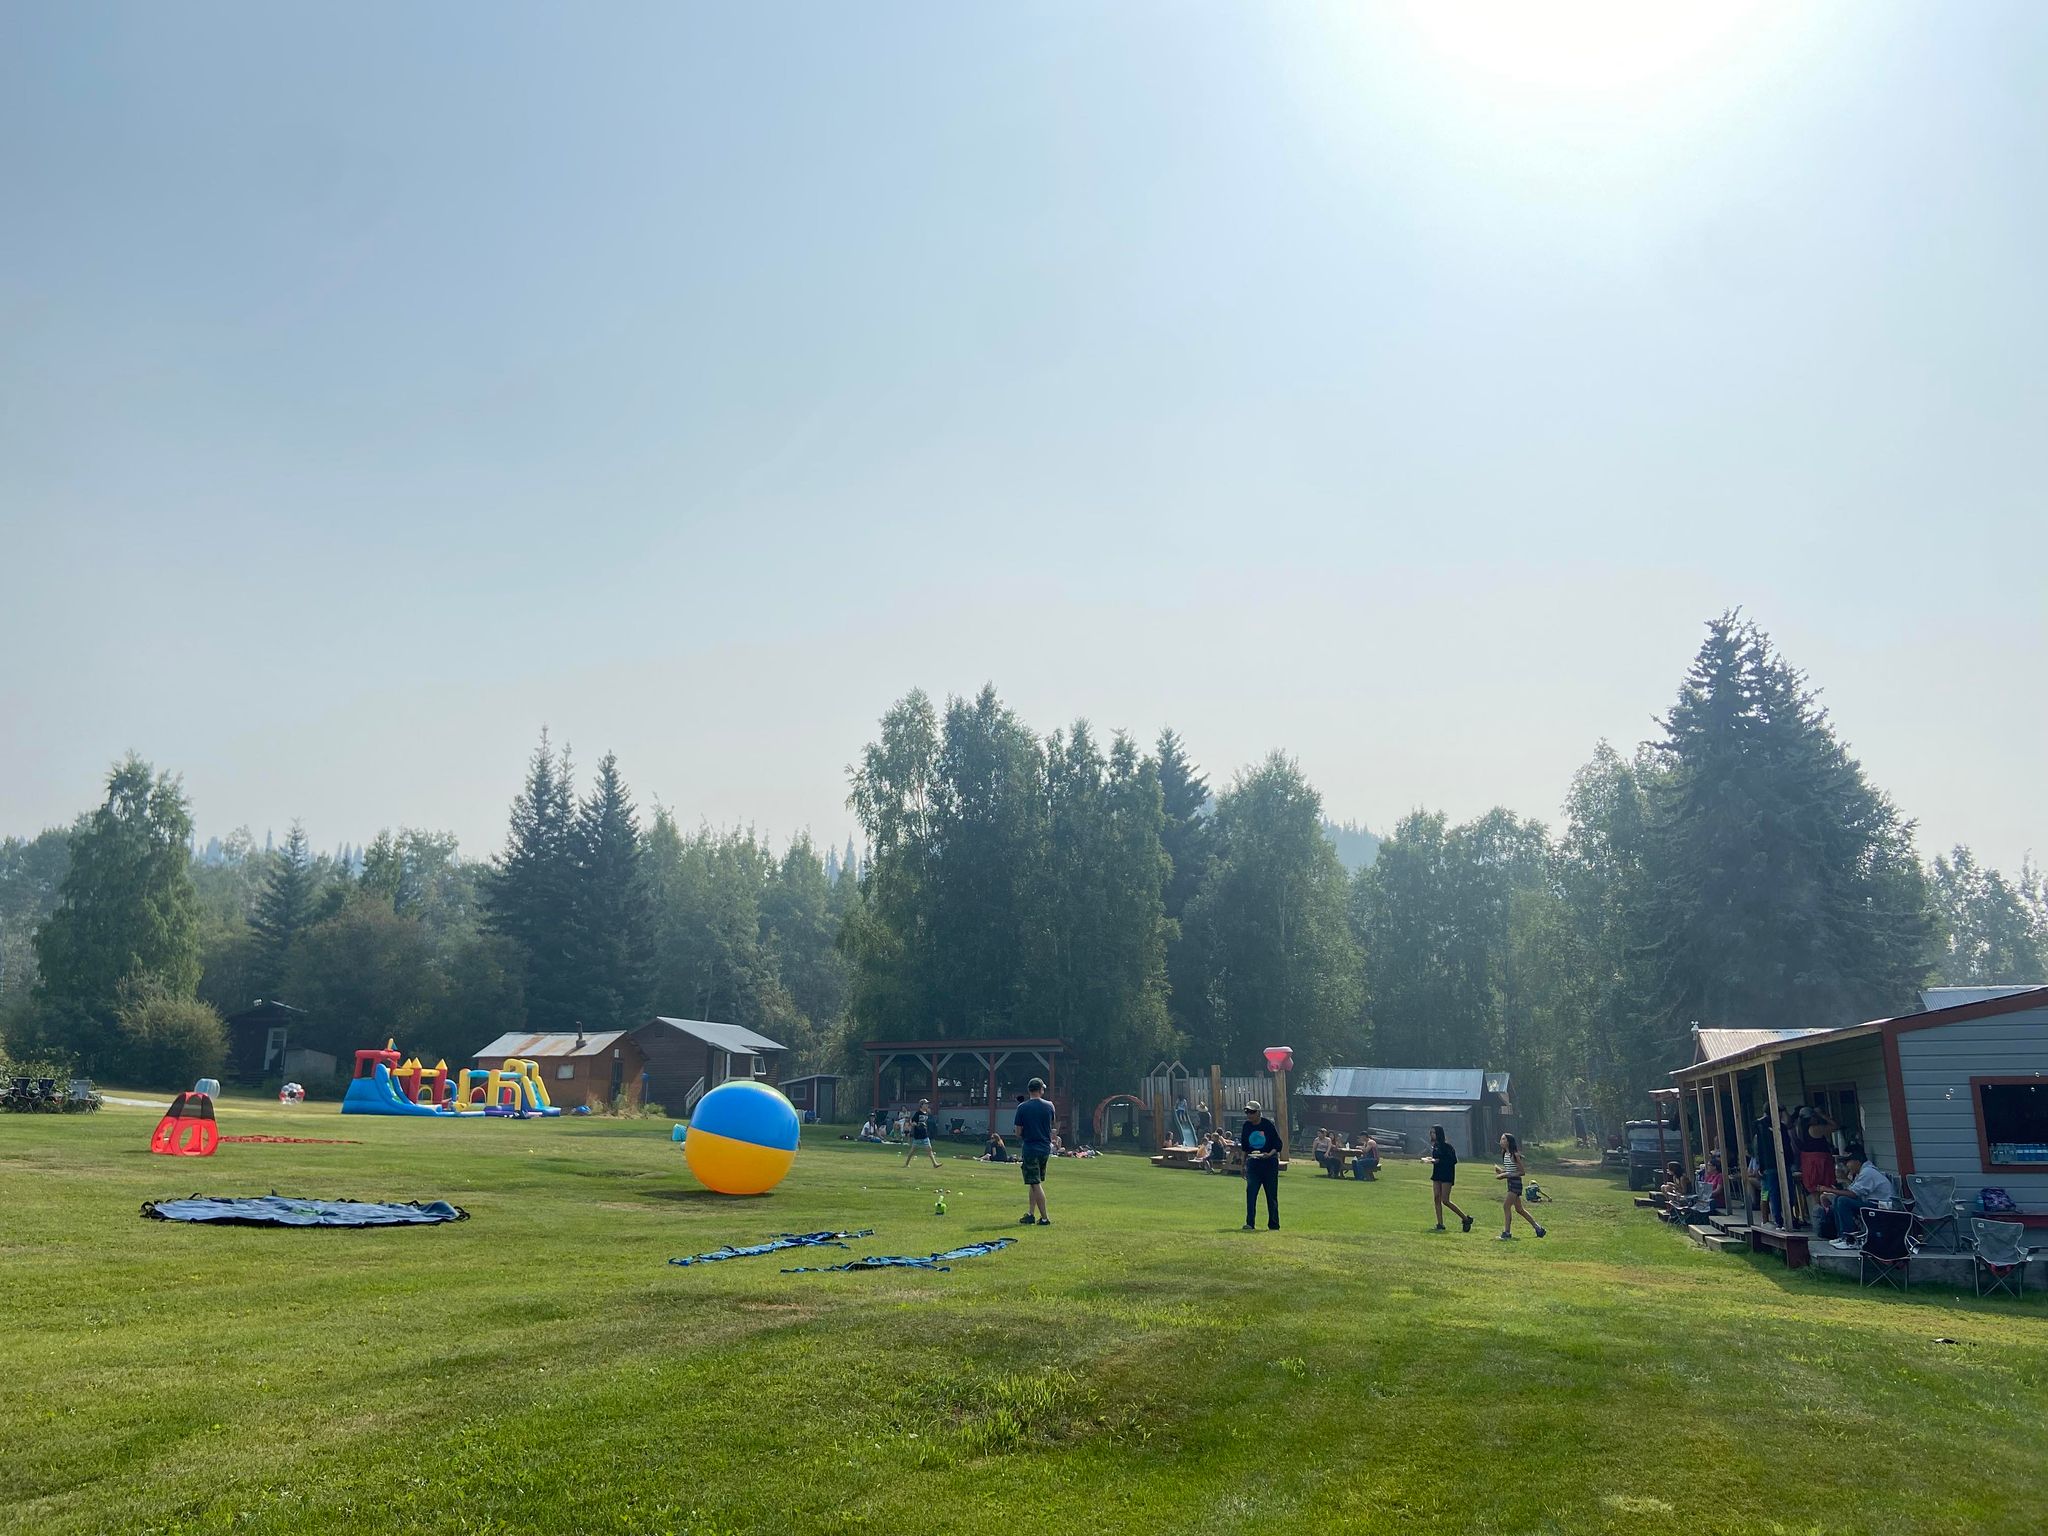 The Ni’ehłyat Nidähjì’ (Our Families, our Future) department of Tr'ondëk Hwëch'in Government hosts family fun days as part of the services they deliver to families and children. 